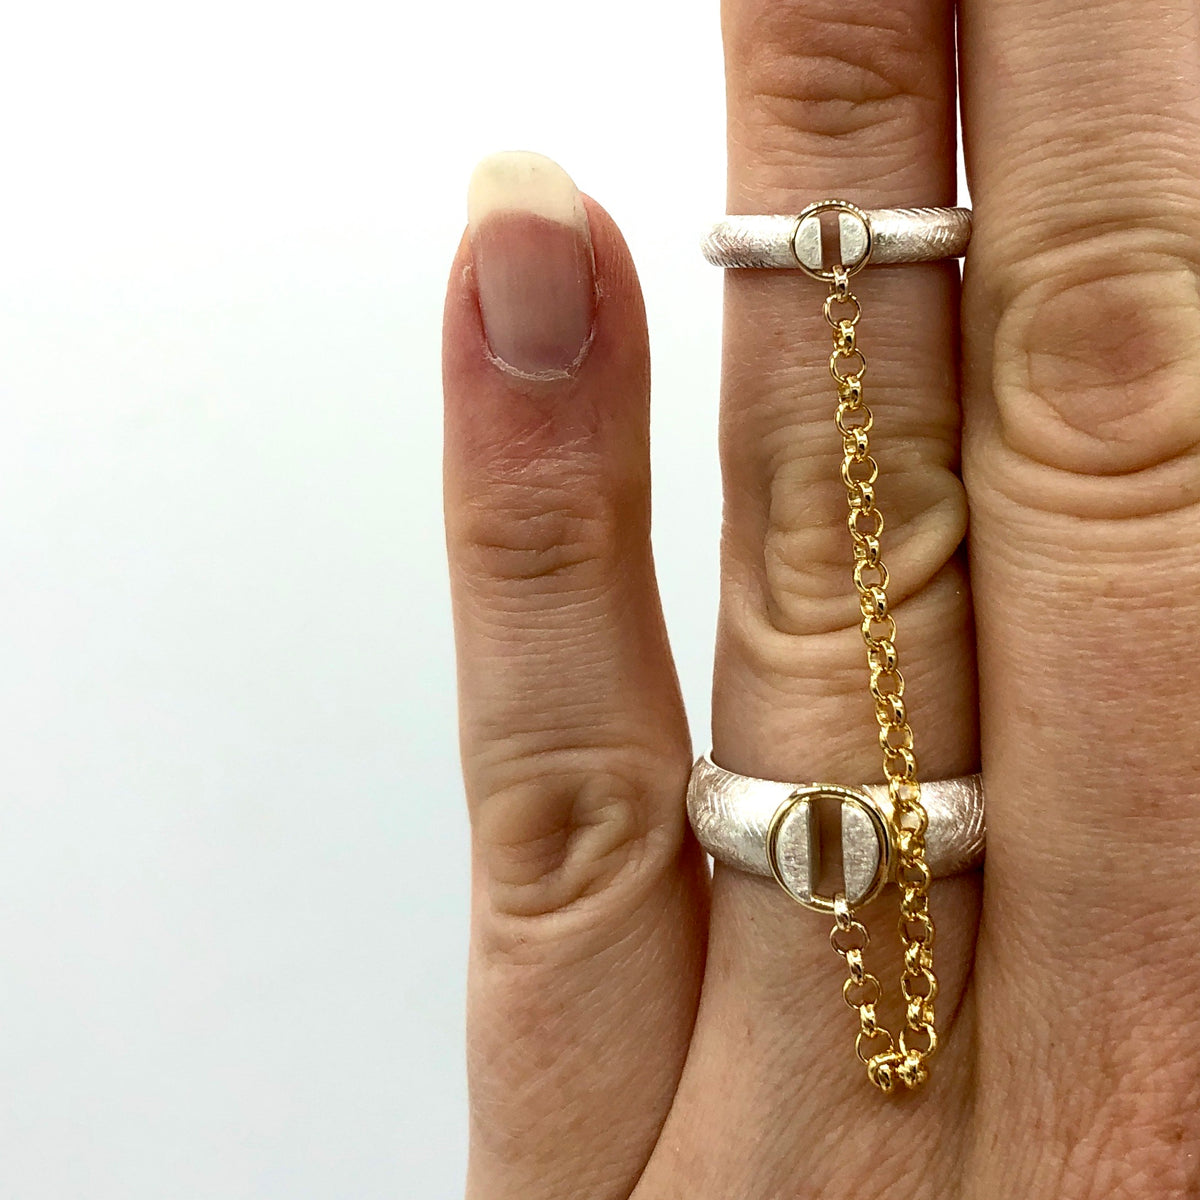 Shackles & Chains Ring(s) – 'Okina Jewelry